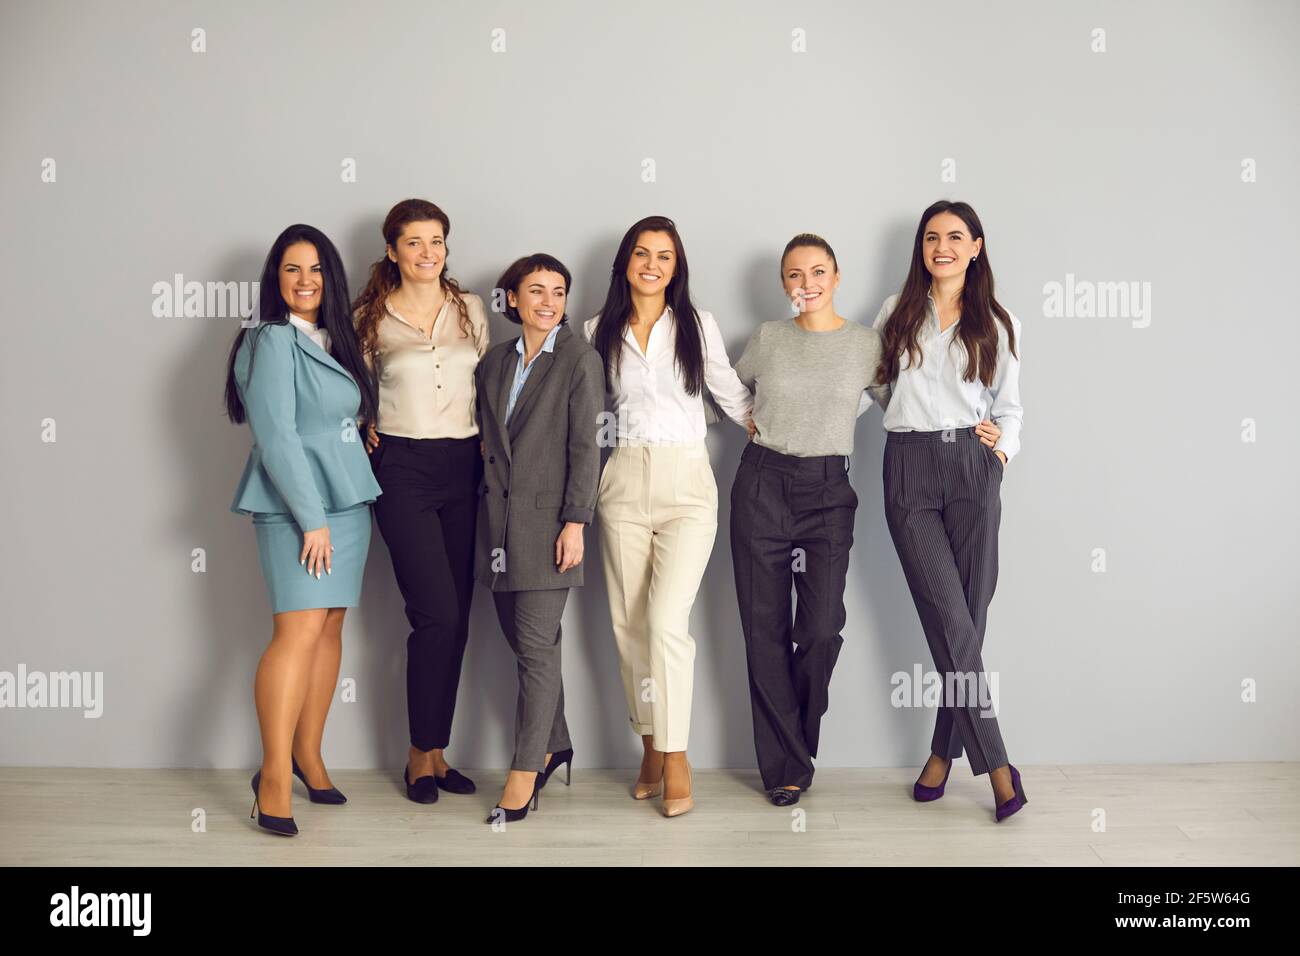 Group portrait of successful and stylish business women posing against gray wall background. Stock Photo